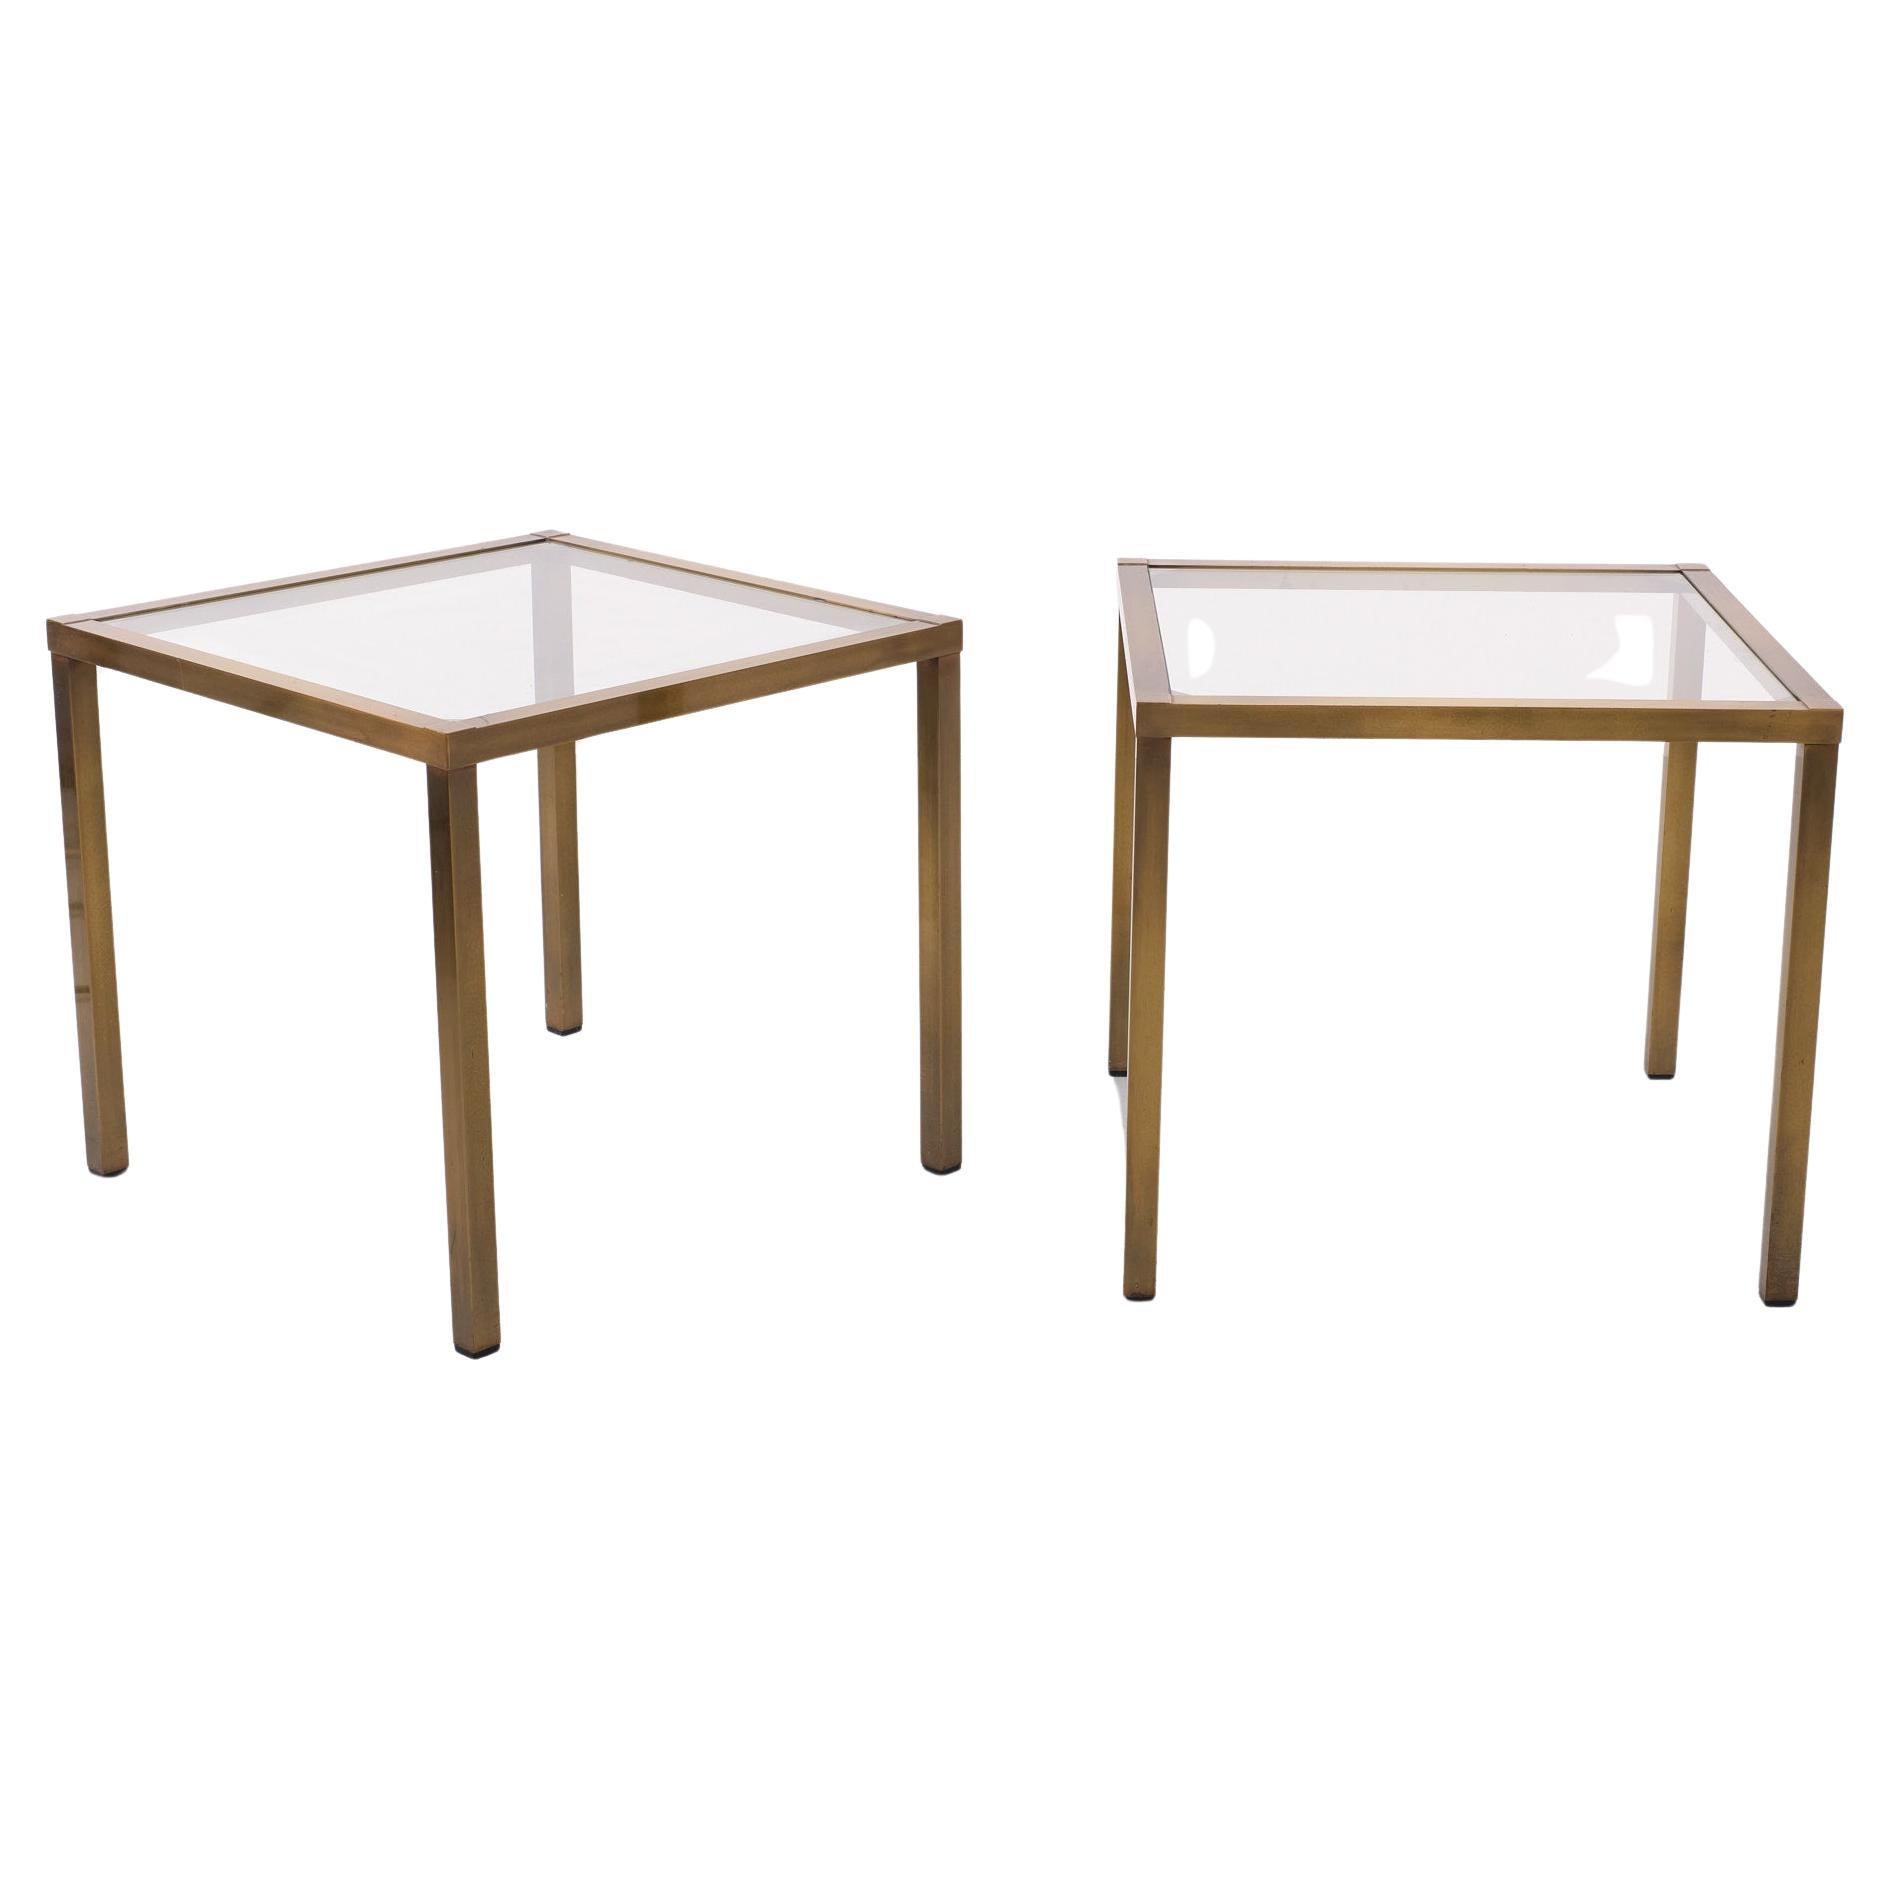 Very nice pair of side tables .Brass with a a Bronze color .
Square frame . so stylish .New Clear Glass tops .   